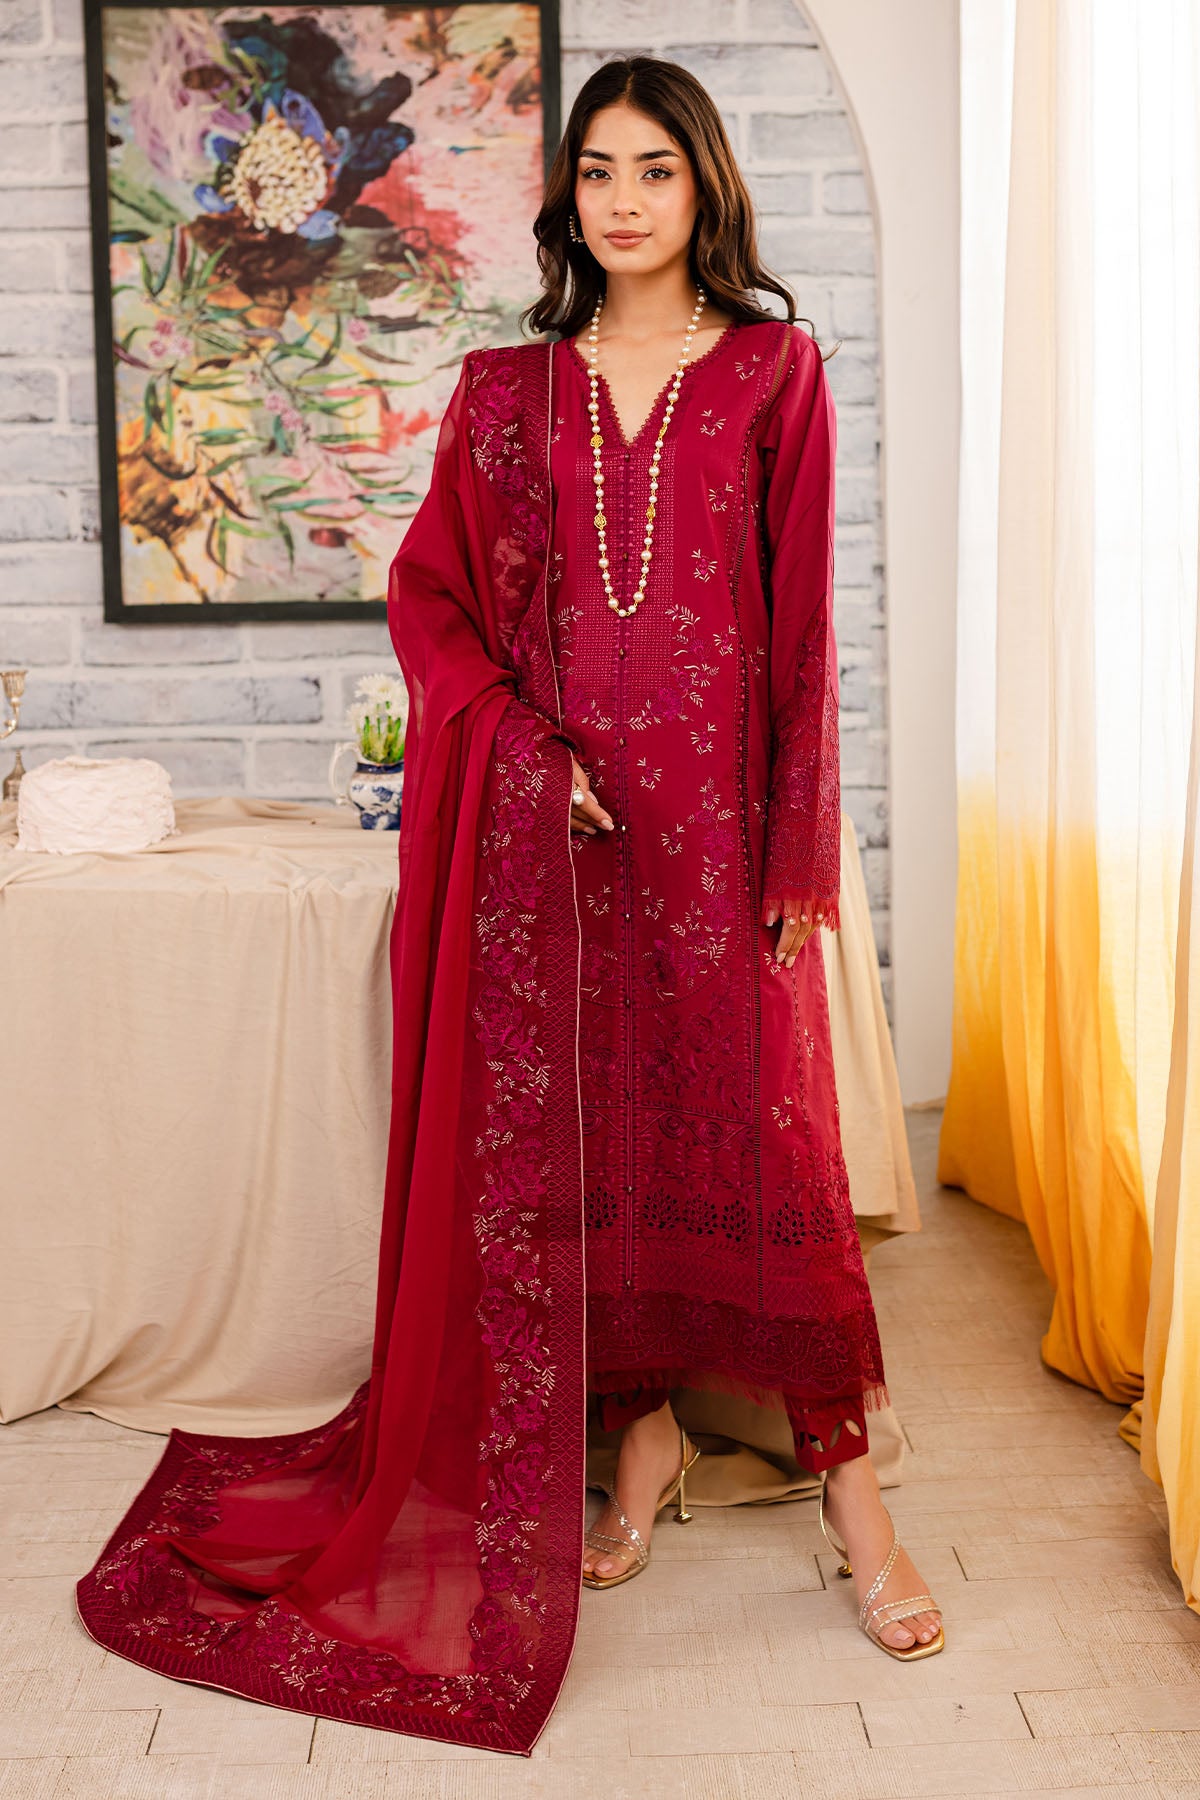 Ready-made Lawn Suits Designs | Ready-made Clothes Online In Pakistan